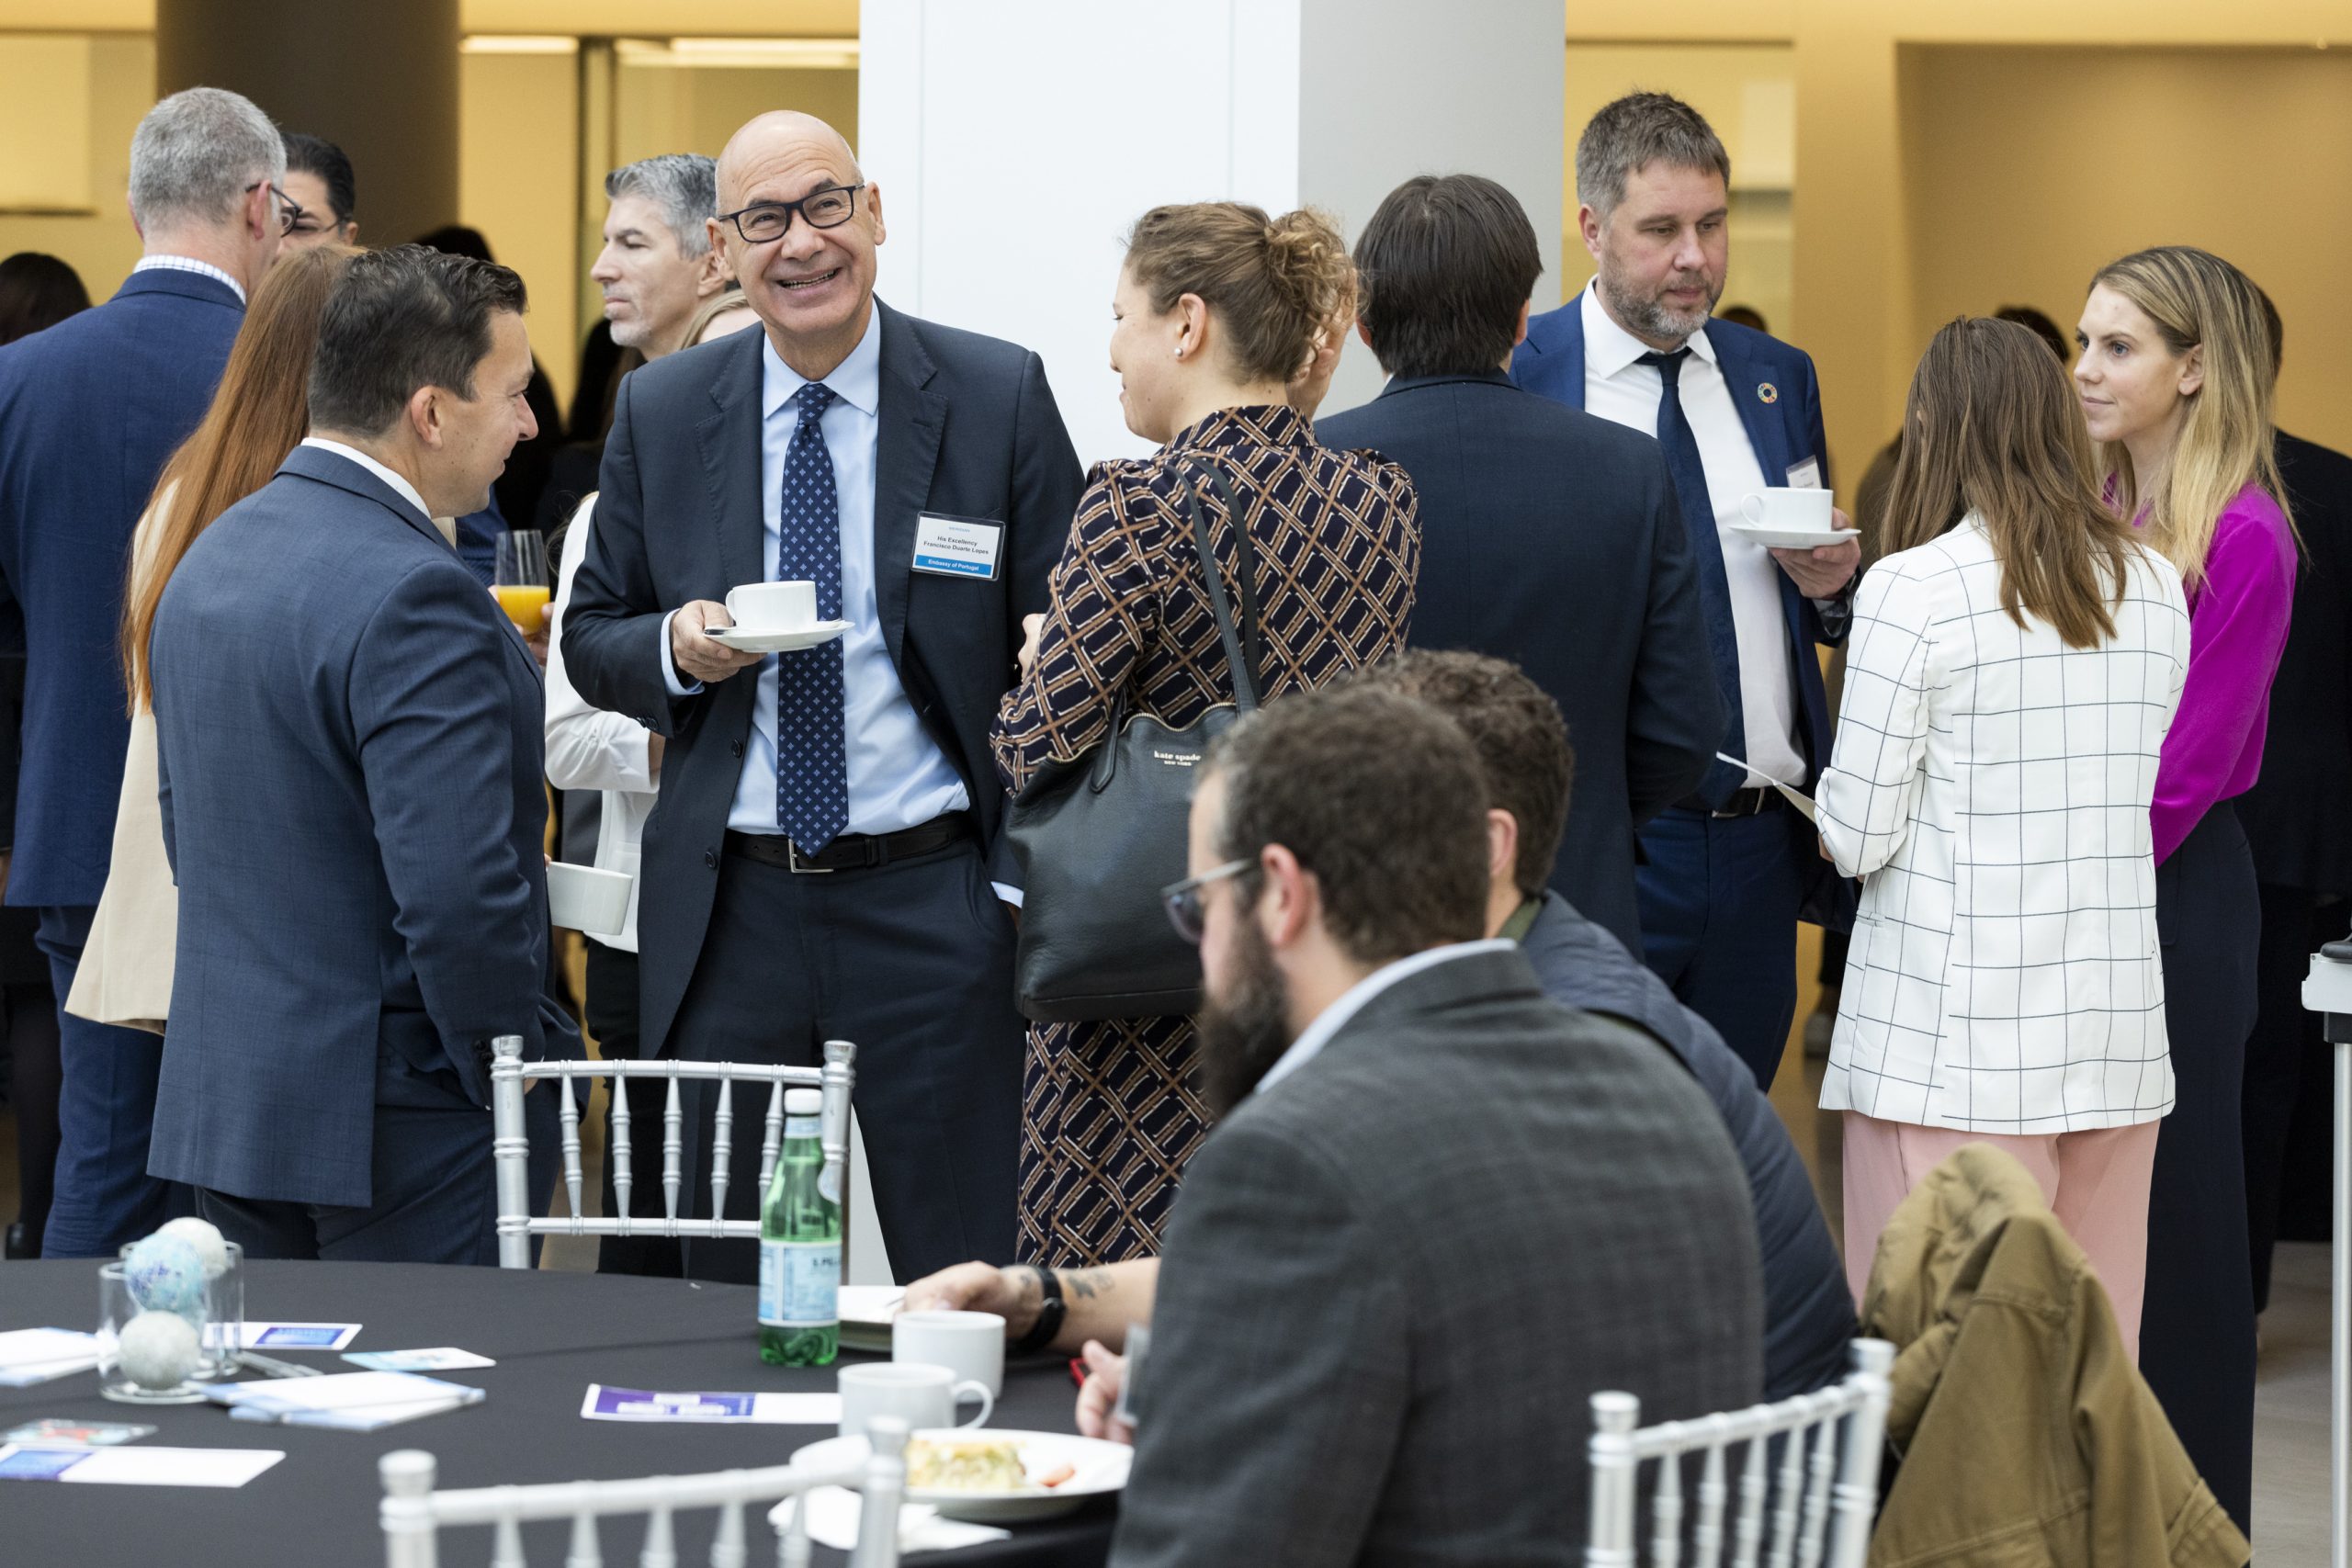 Participants gathered at the 11th Annual Meridian Summit on “Preparing for Tech Transformation in a Digitalized World” on October 21, 2022, at the United States Institute of Peace in Washington, DC.